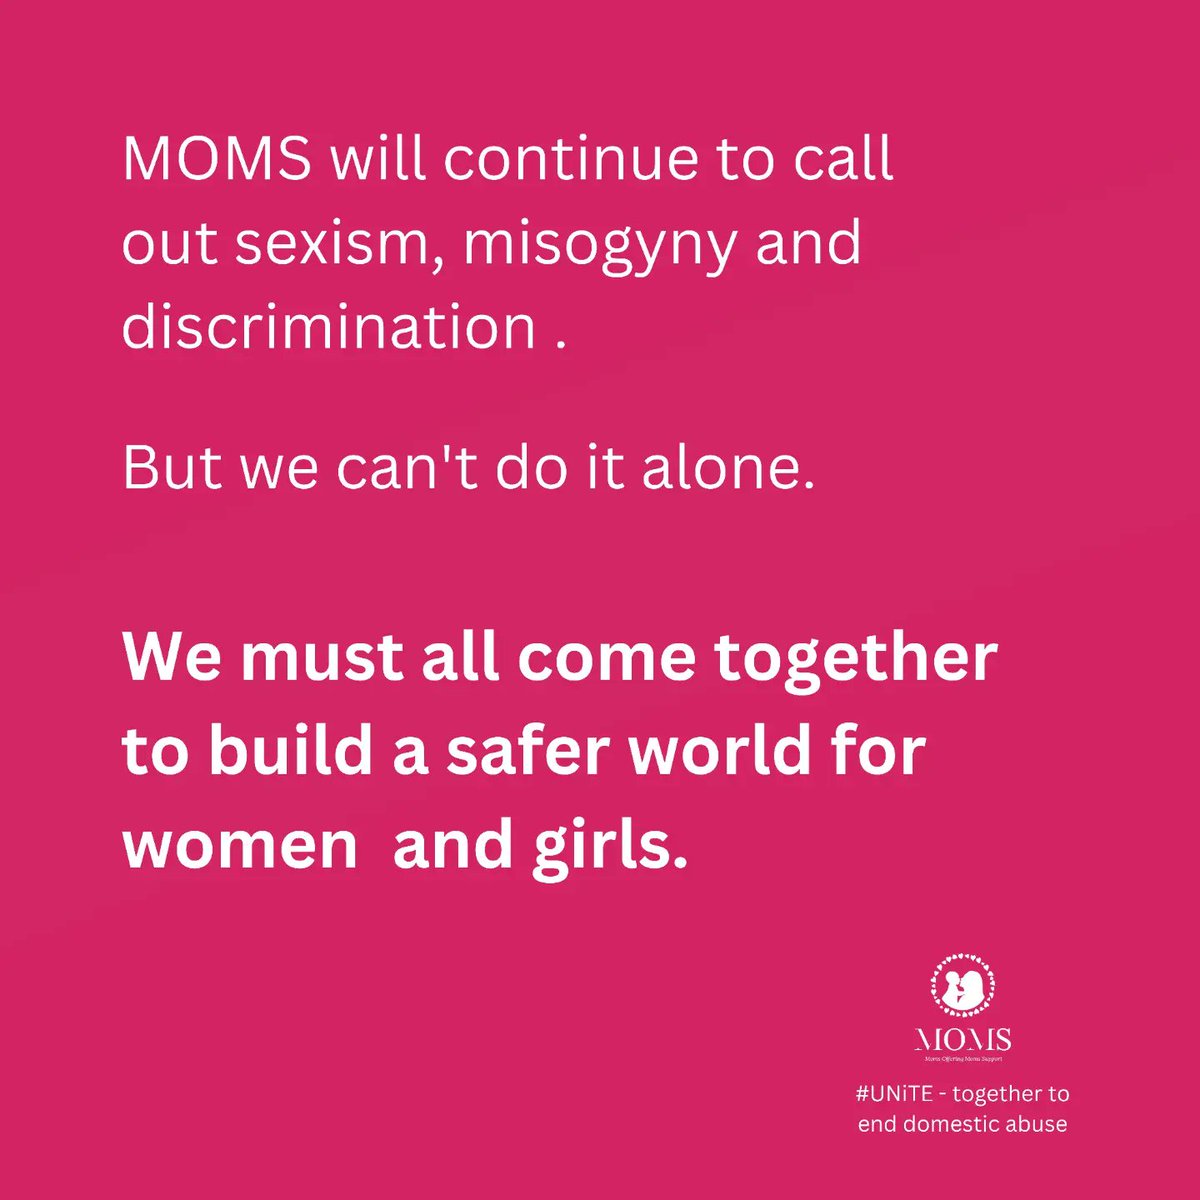 We cannot continue in a world where so many women lives are lost to male violence. 

#unitedtogethertoendviolence
#16days
#domesticviolence
#endviolencetogether
#momsngo
#unite